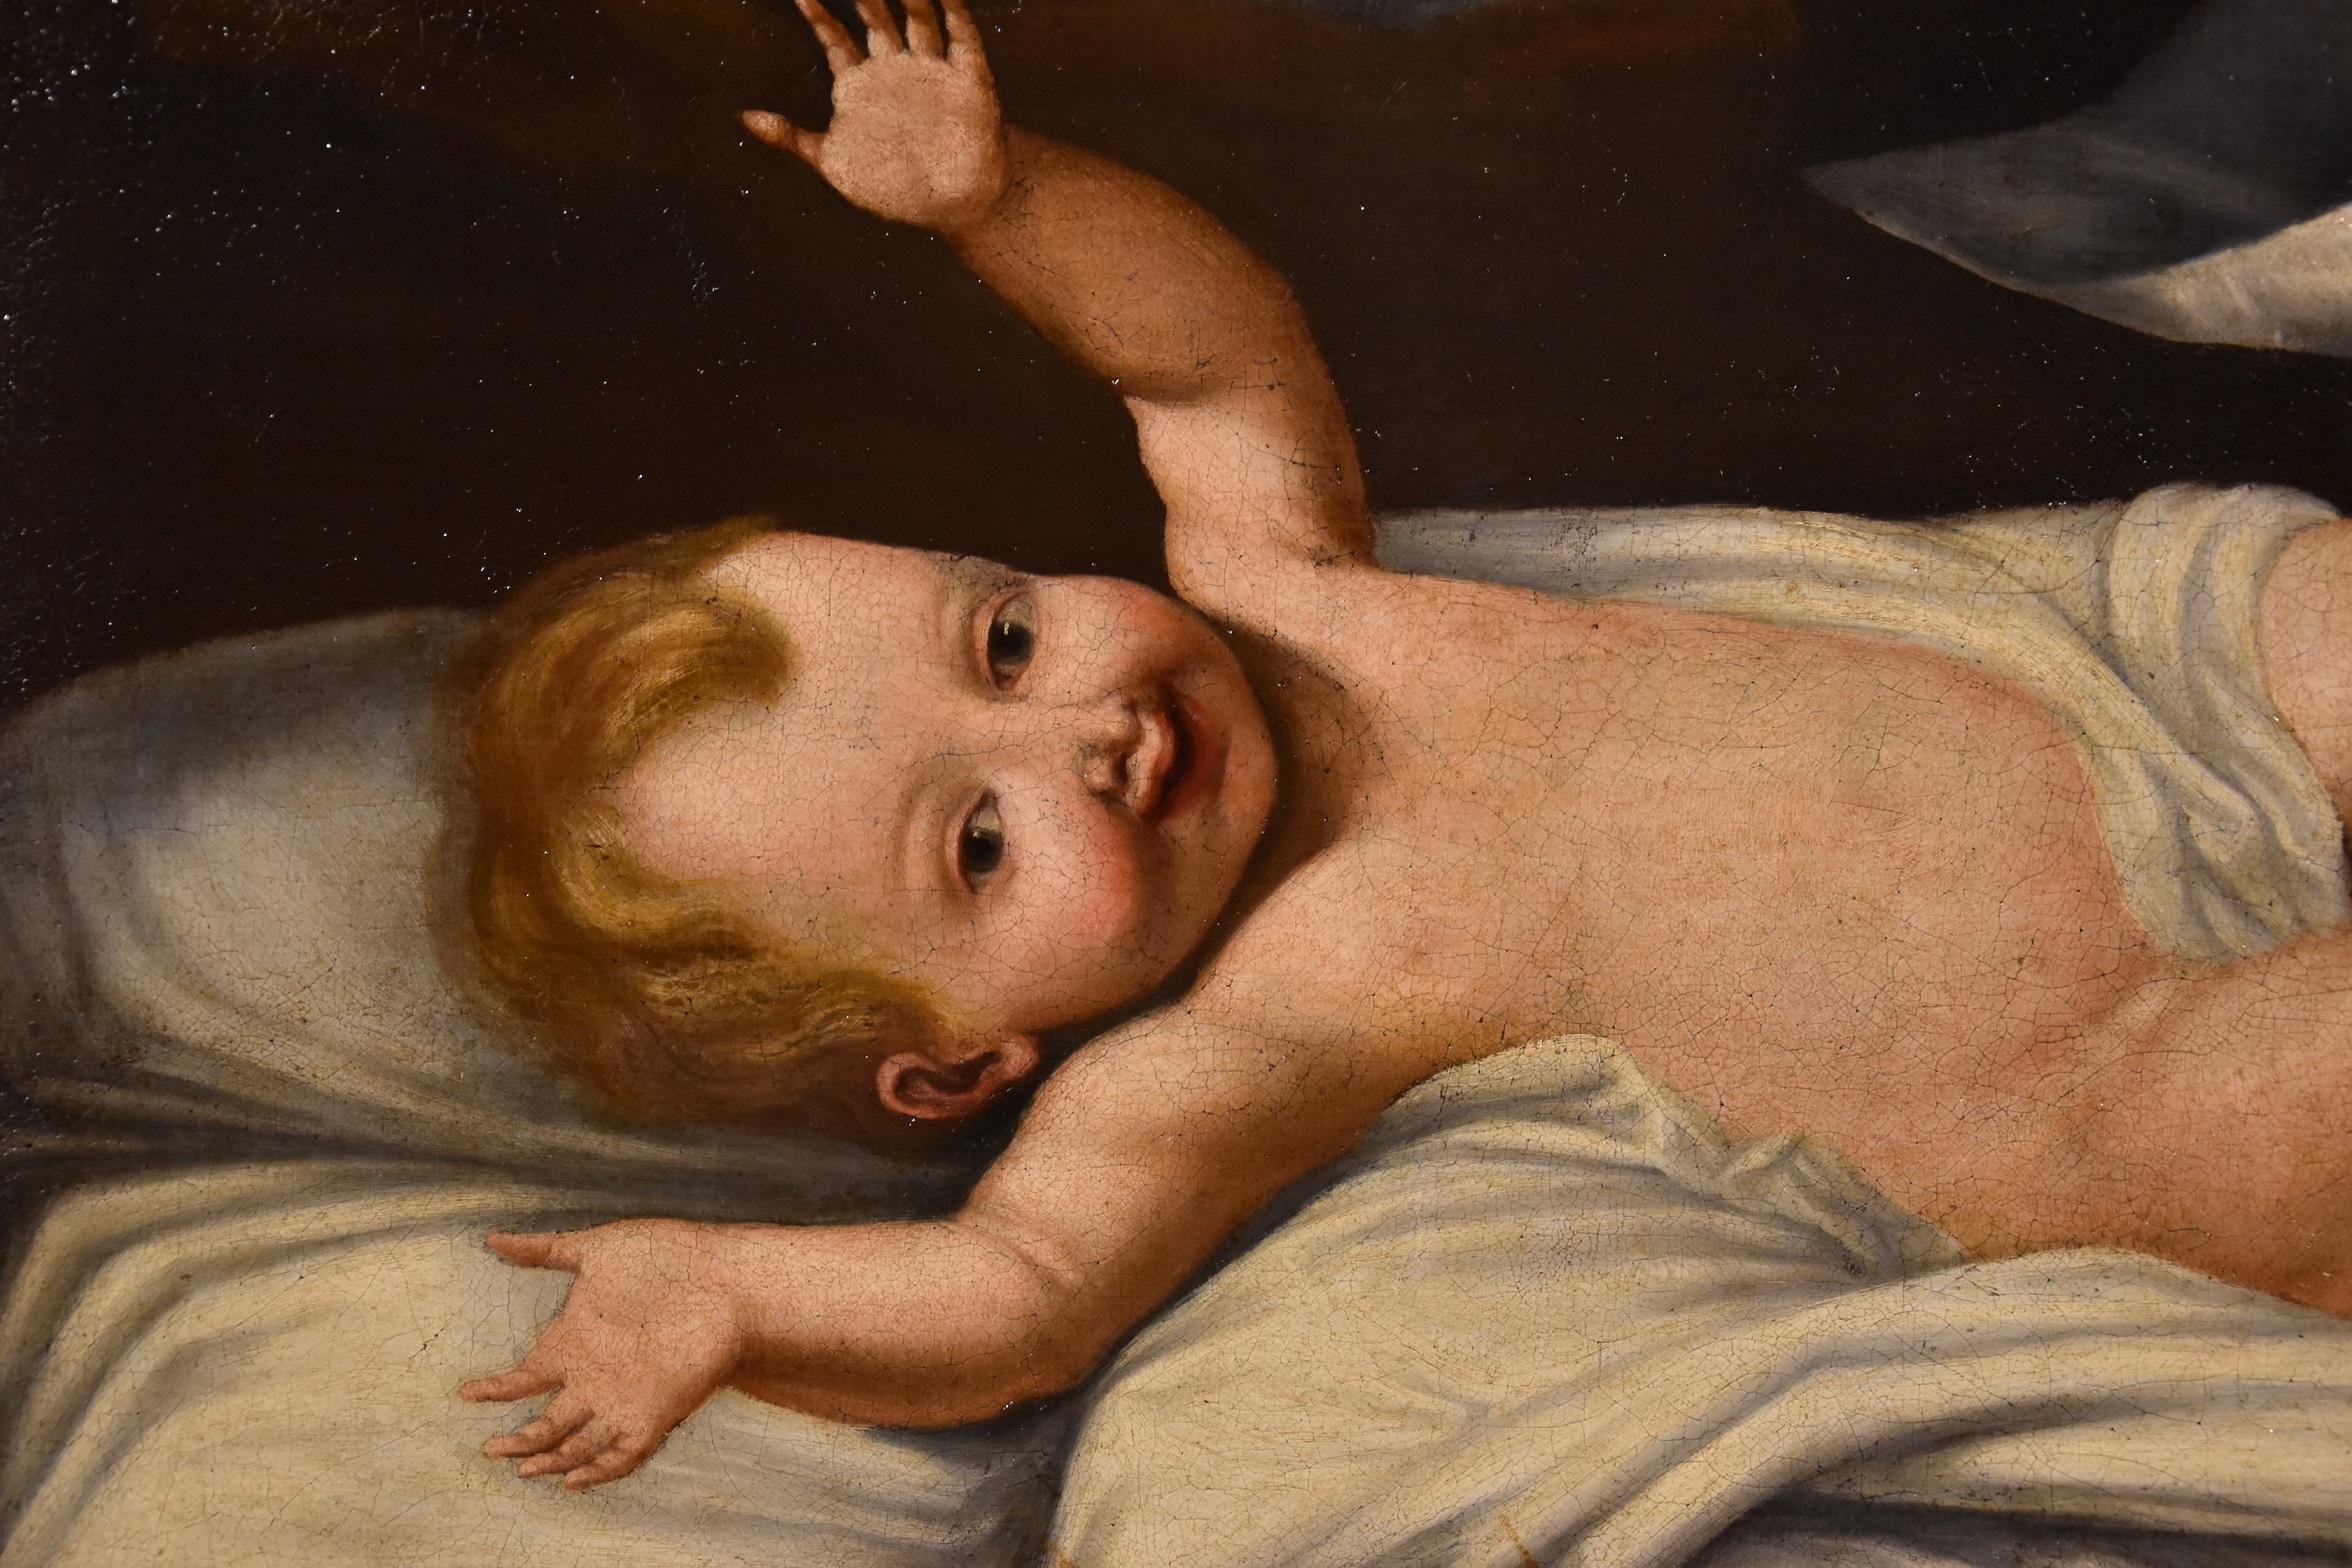 Child Jesus Paint Oil on canvas Old master 17th Century Baby Italian Religious  - Old Masters Painting by Lombard painter active in the 17th century